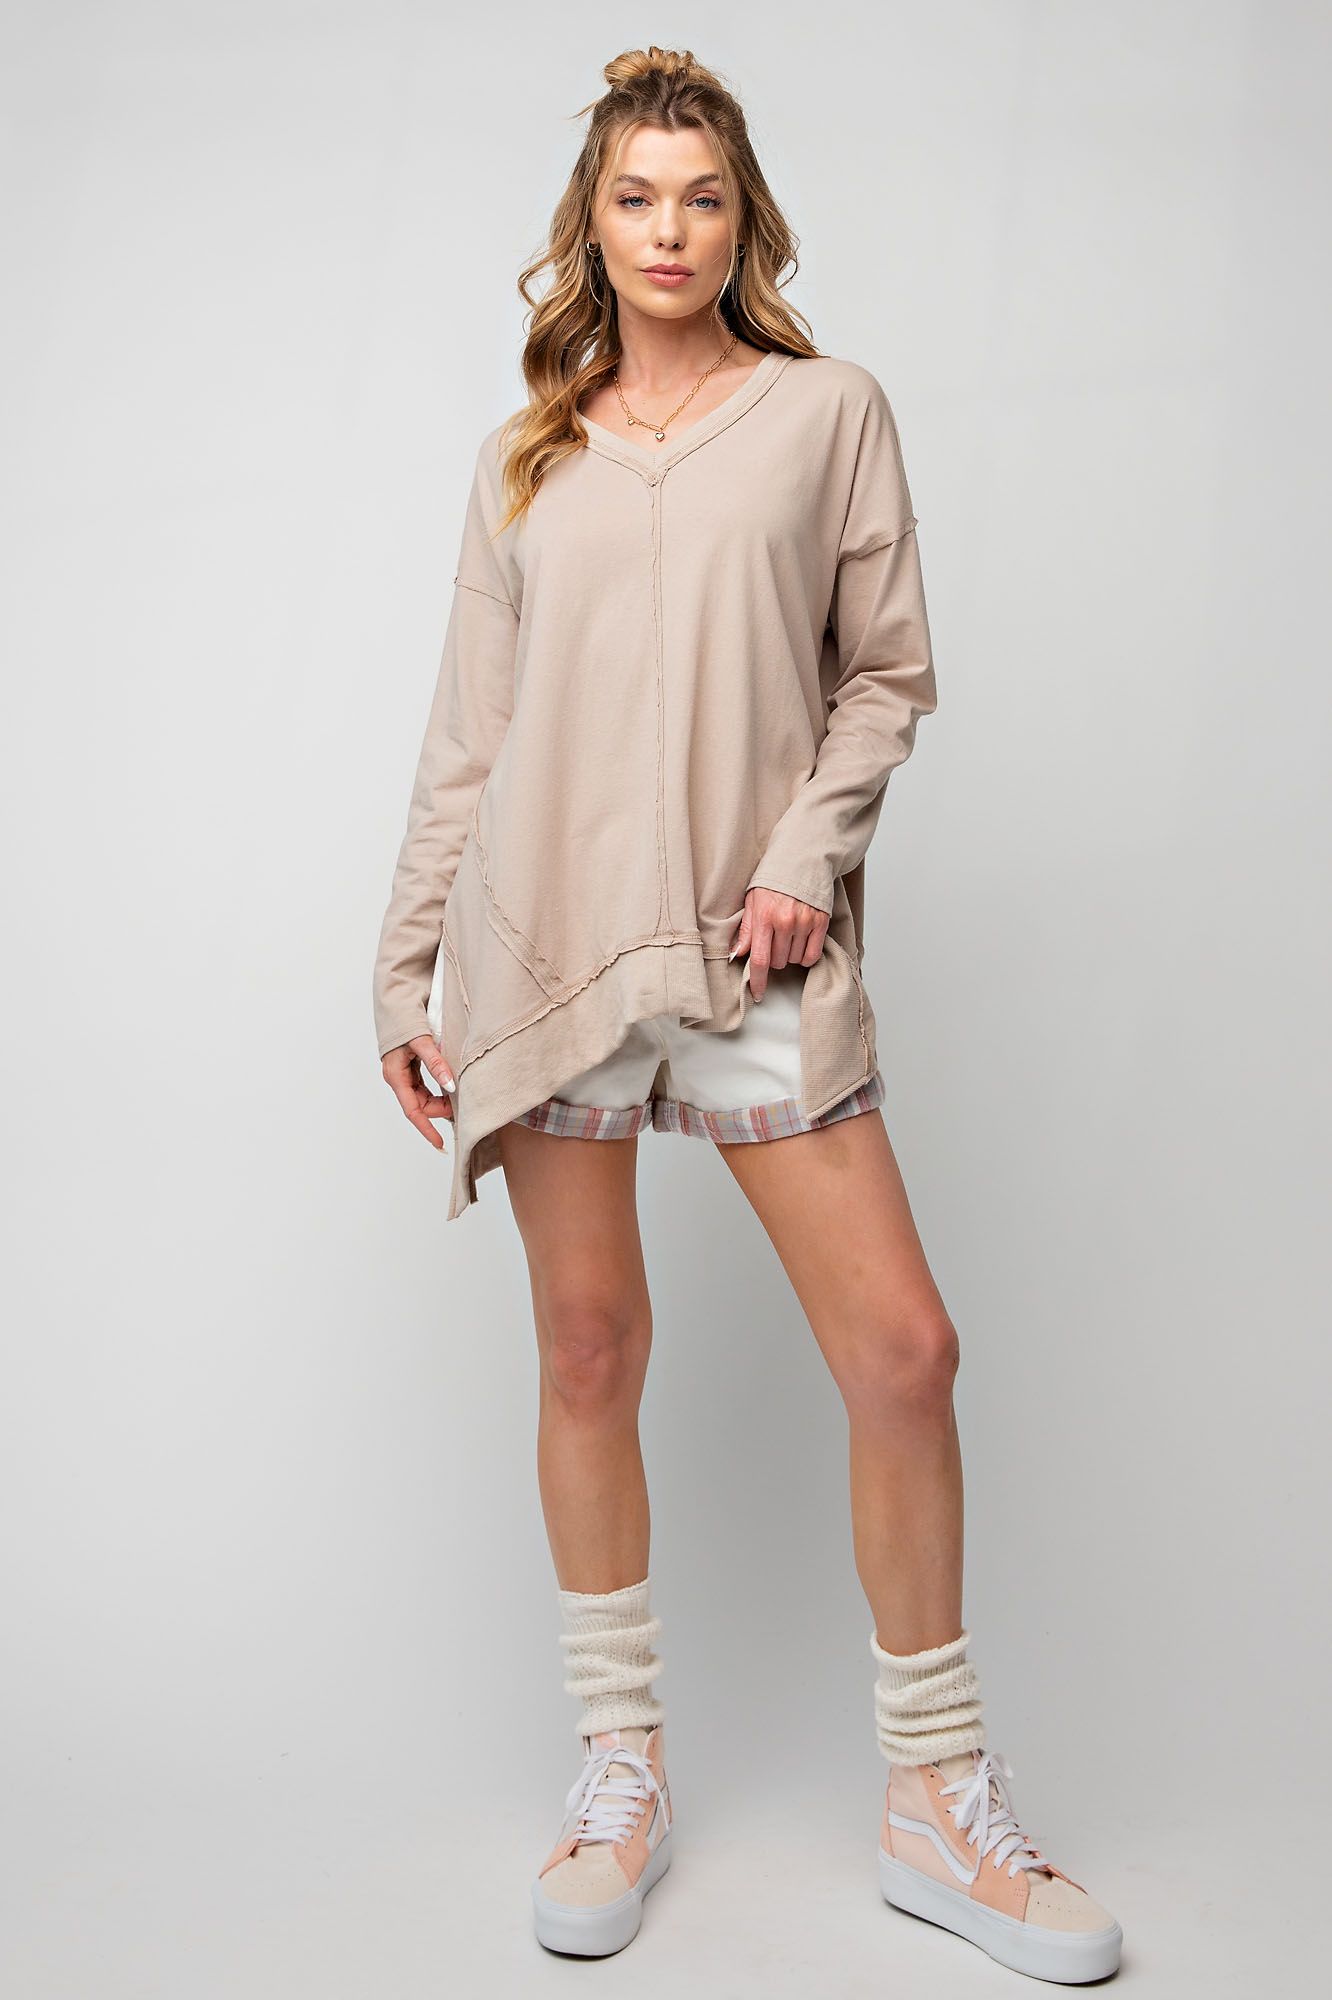 Sharkbite Hem Tunic in a size small(relaxed fit)